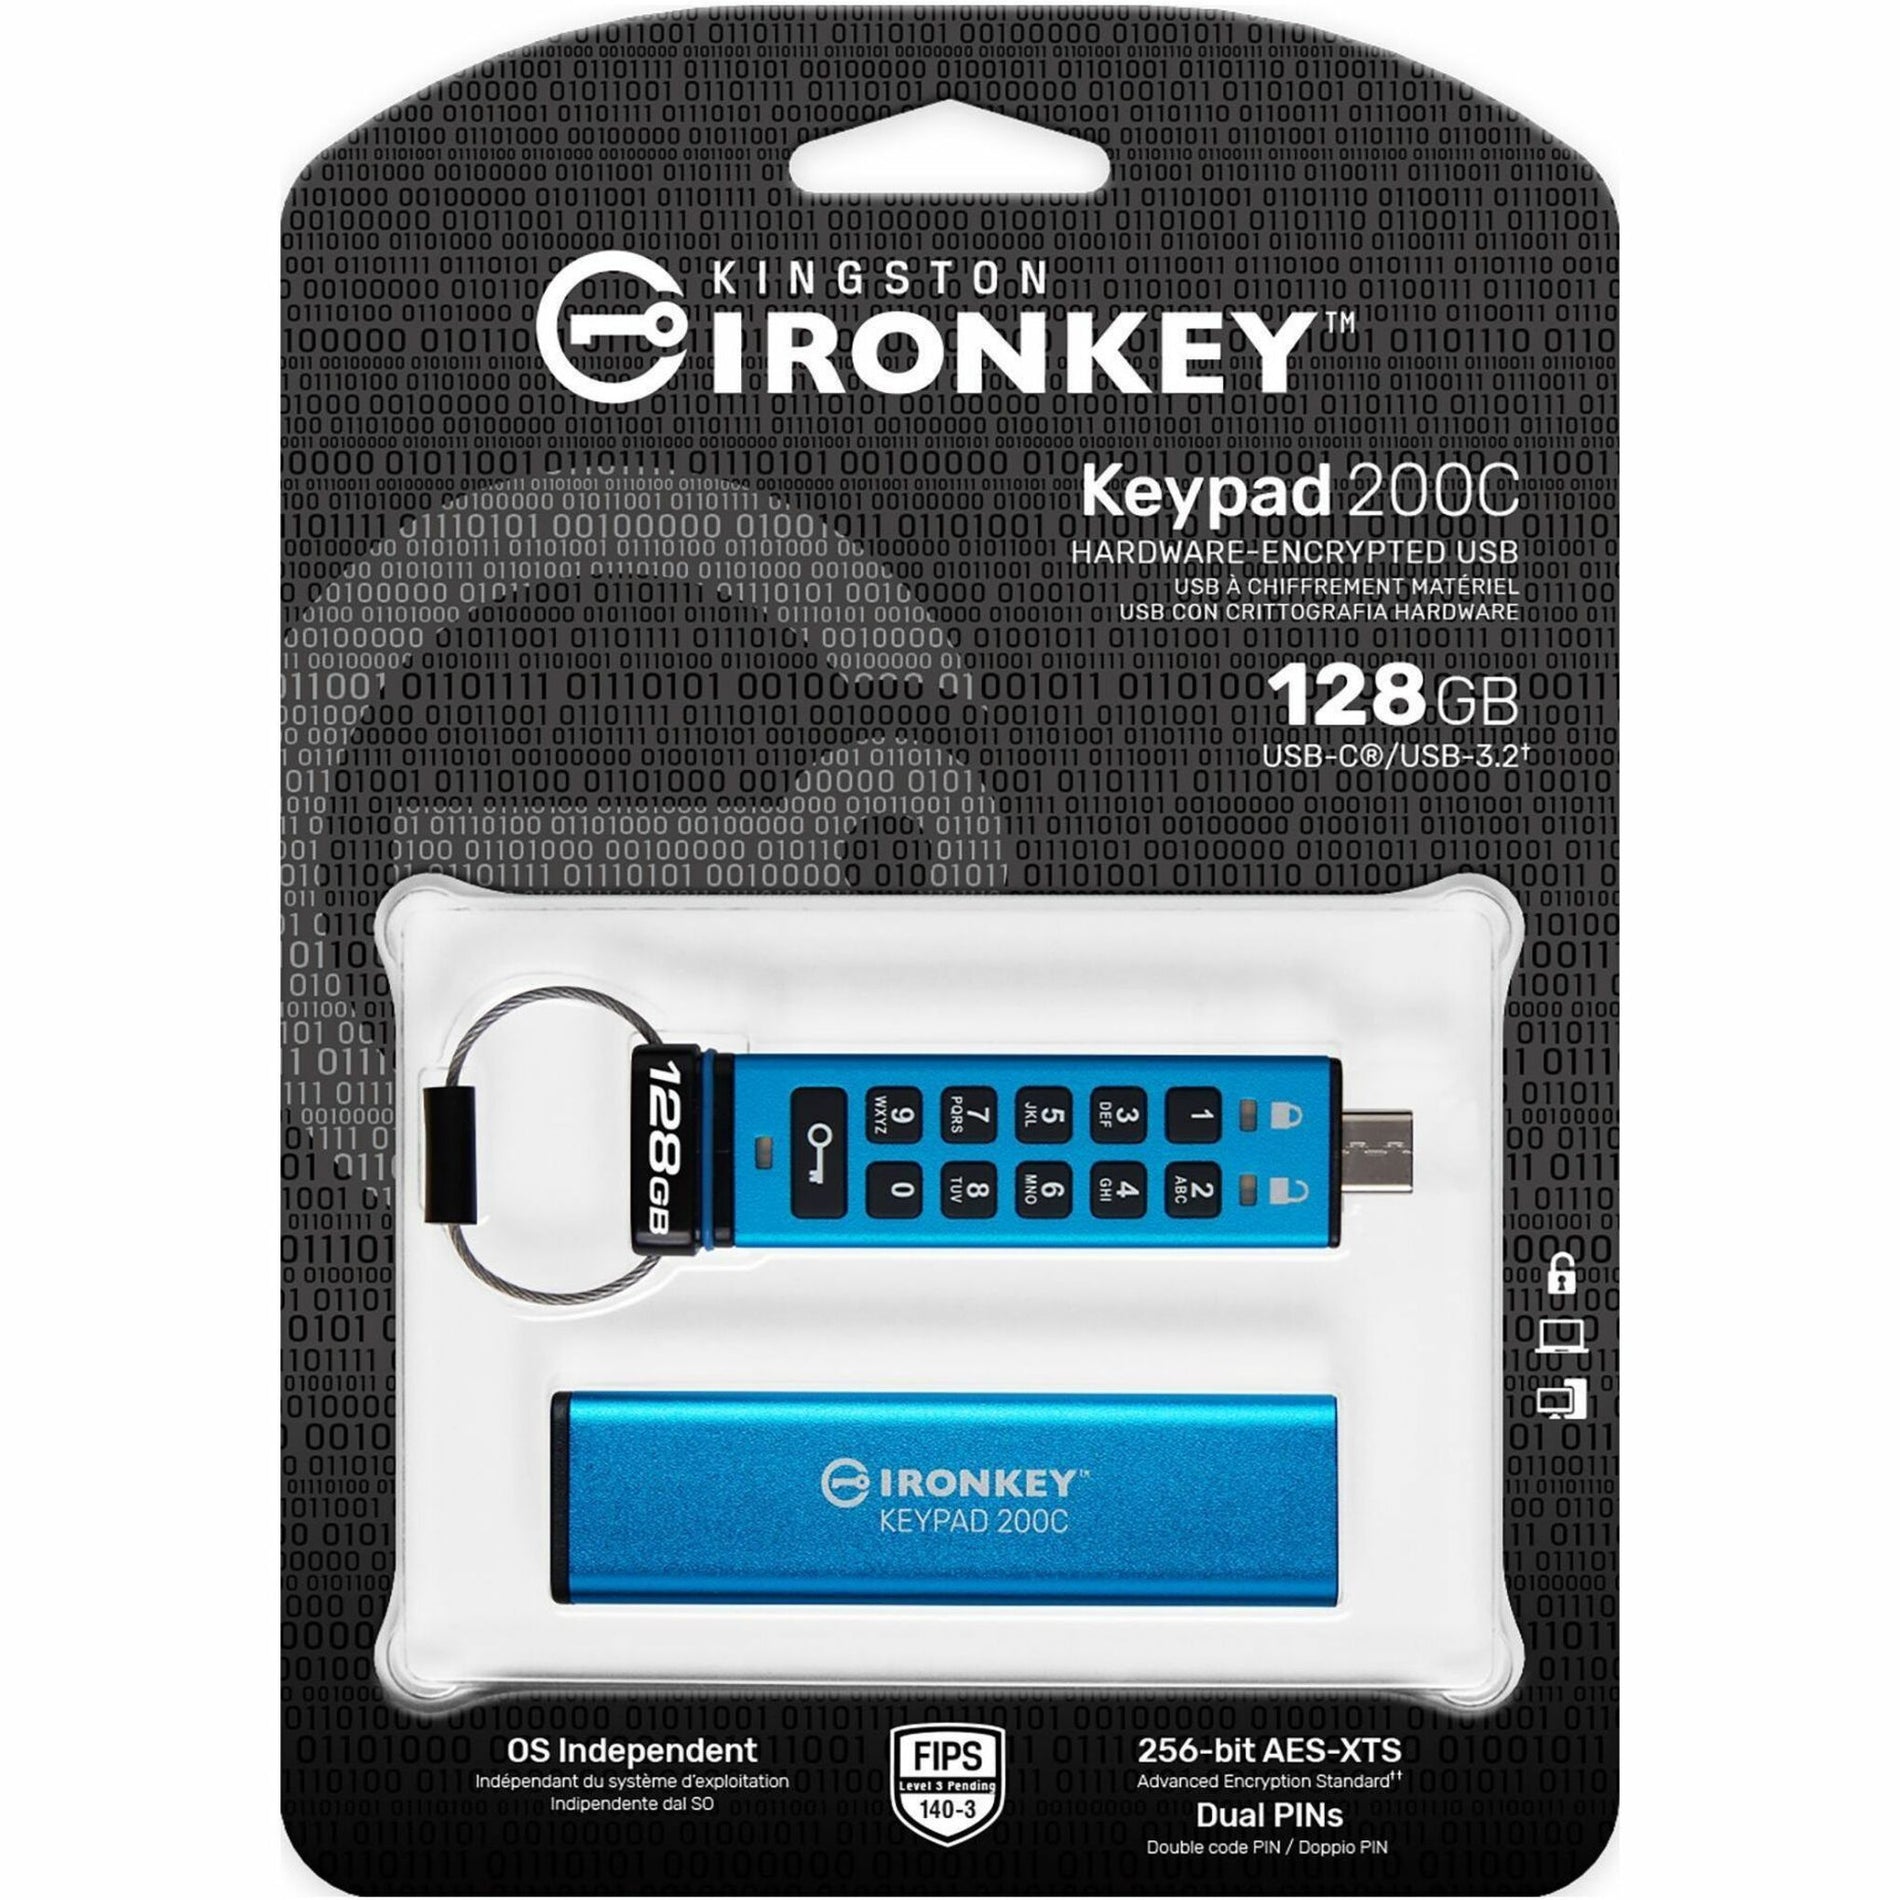 IronKey IKKP200C/128GB Keypad 200 128GB USB 3.2 (Gen 1) Type C Flash Drive, Tamper Resistant, PIN Pad Protection, Customizable PIN, Digitally Signed Secure Firmware, Dust Proof, Water Proof